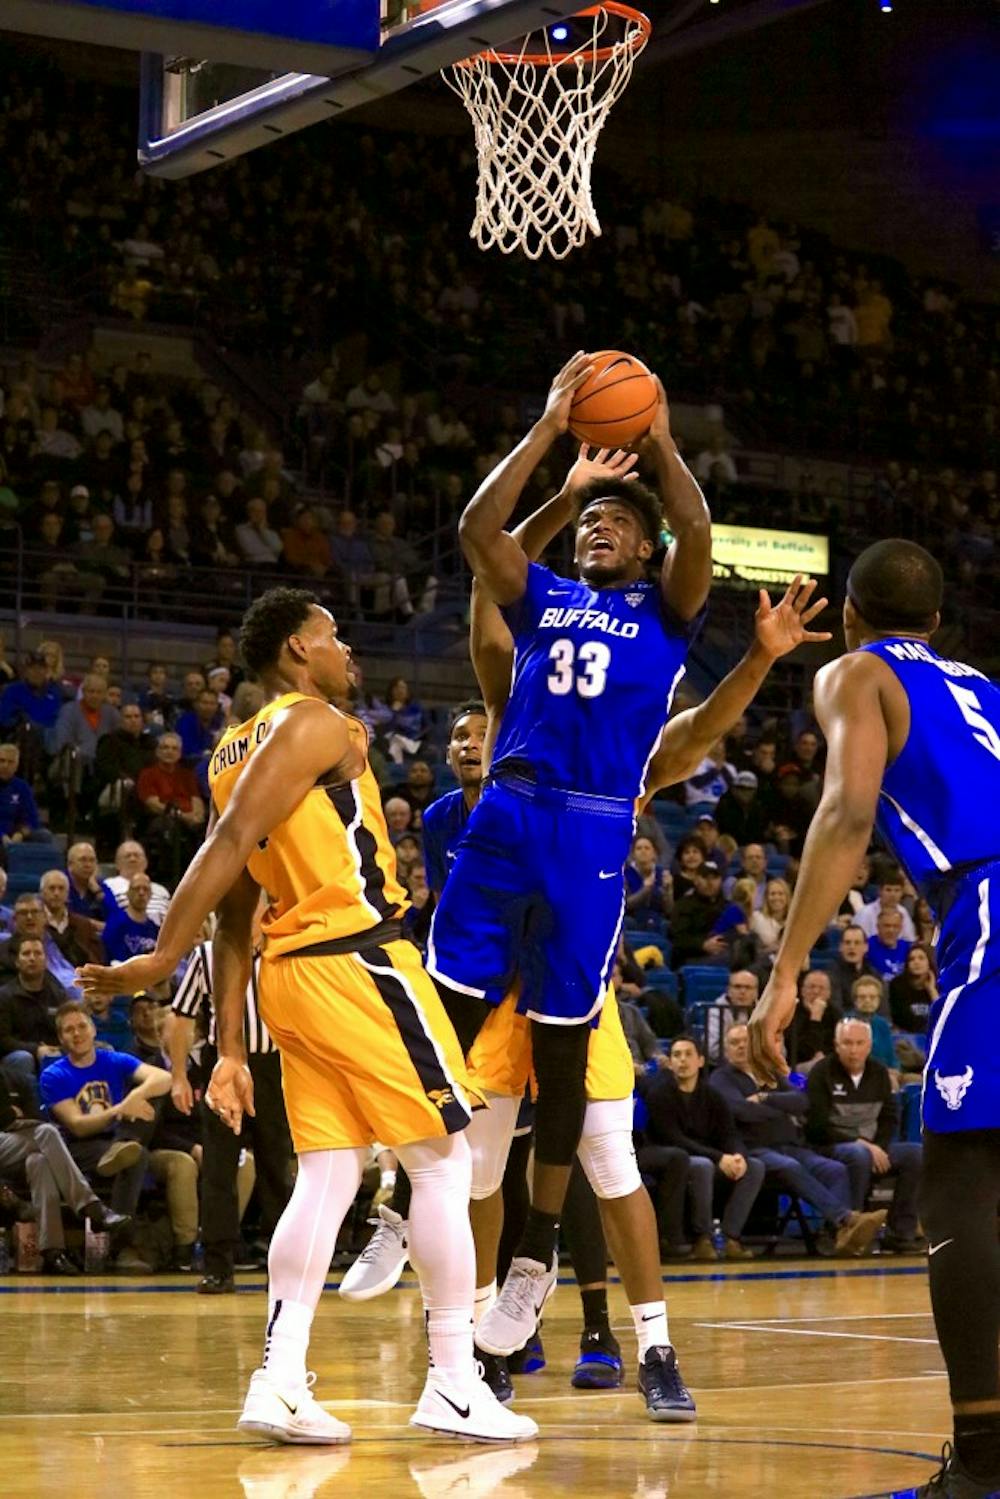 <p>Junior forward Nick Perkins fights through contact for a shot. Perkins finished Saturday with a career-high 26 points.</p>